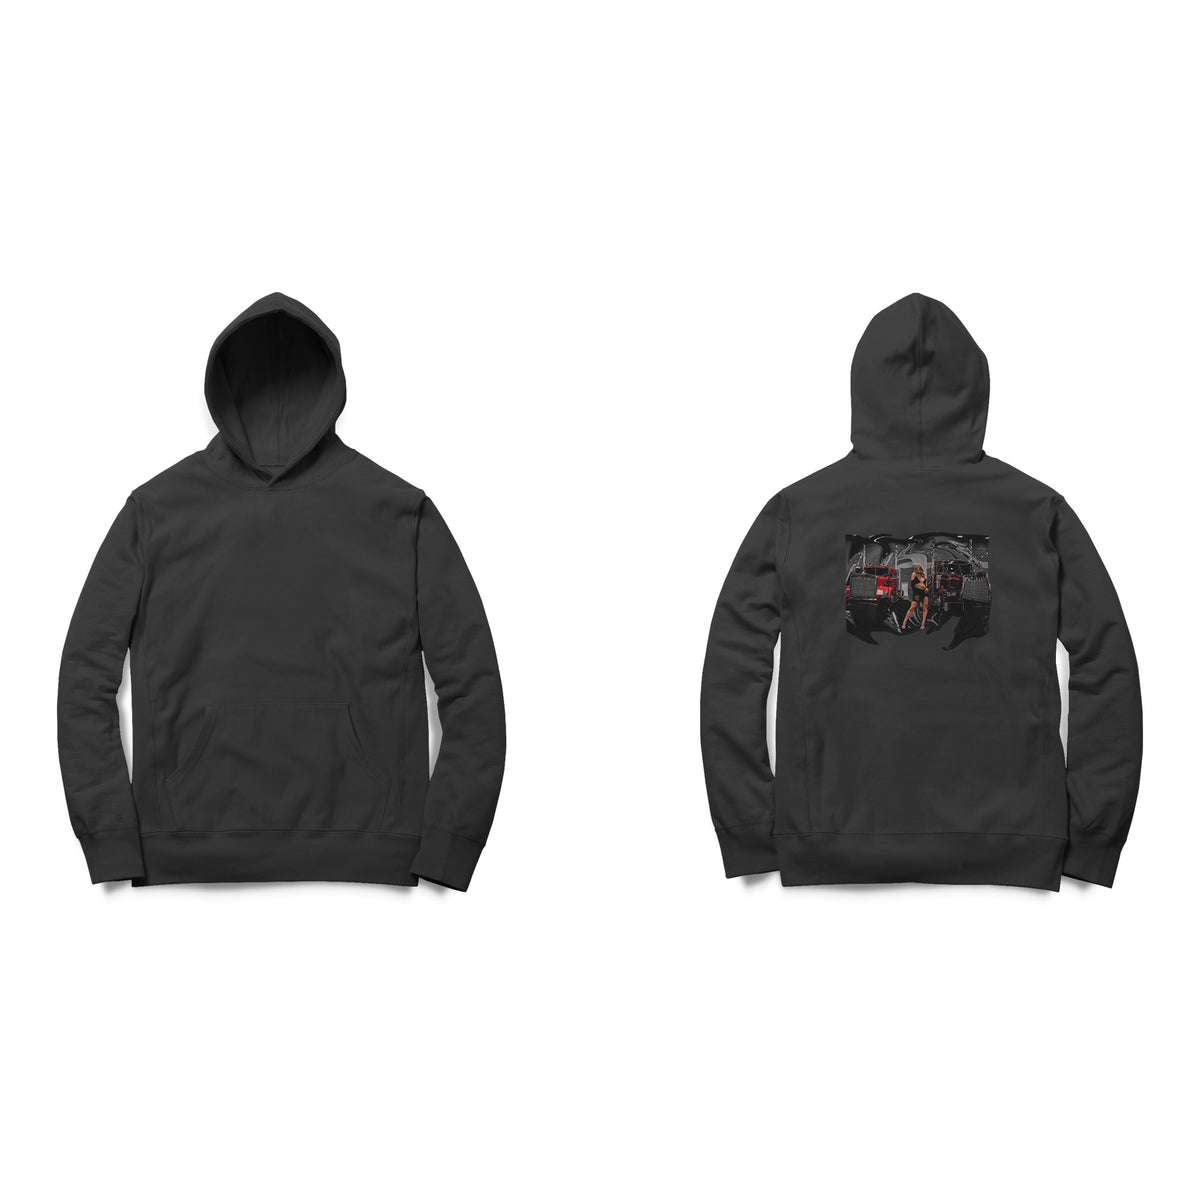 Twisted IMT Shirts and Hoodies